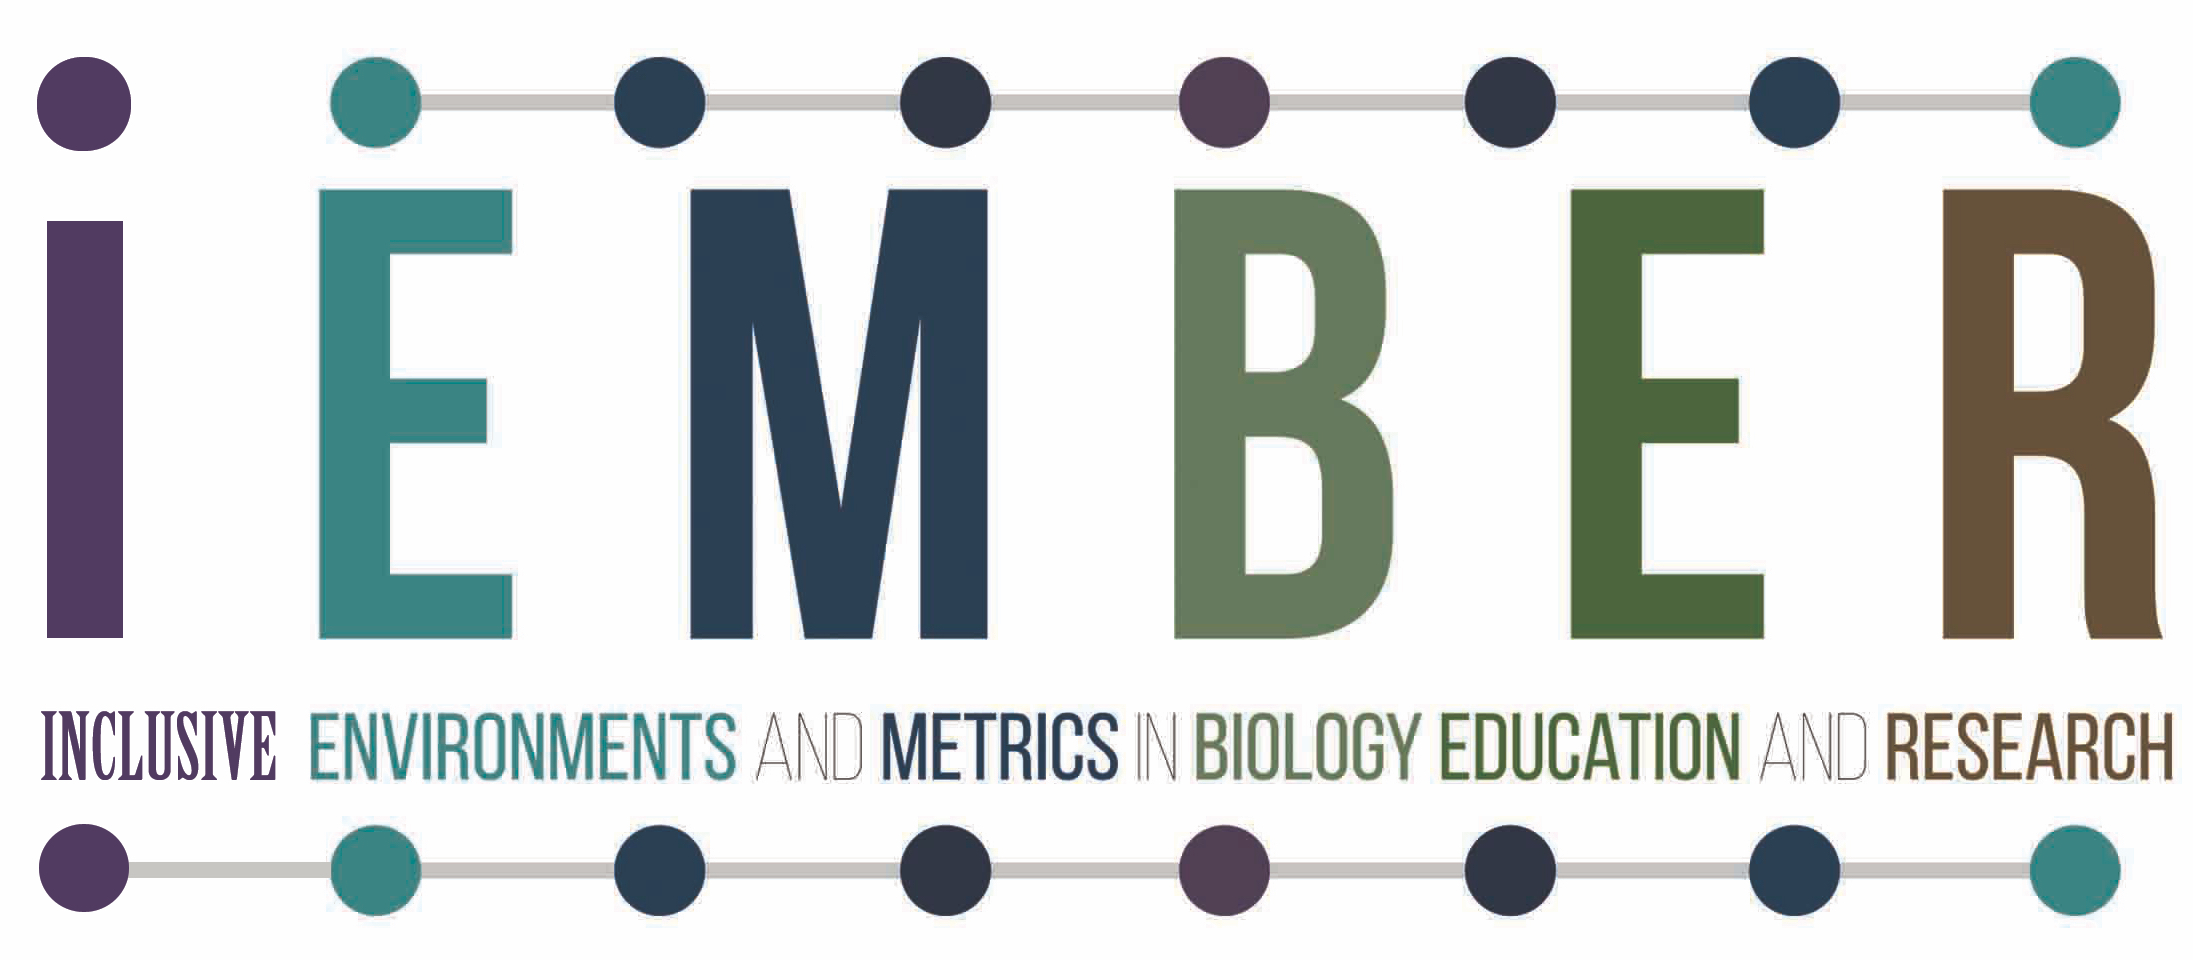 iEMBER (inclusive Environments and Metrics in Biology Education and Research) Network